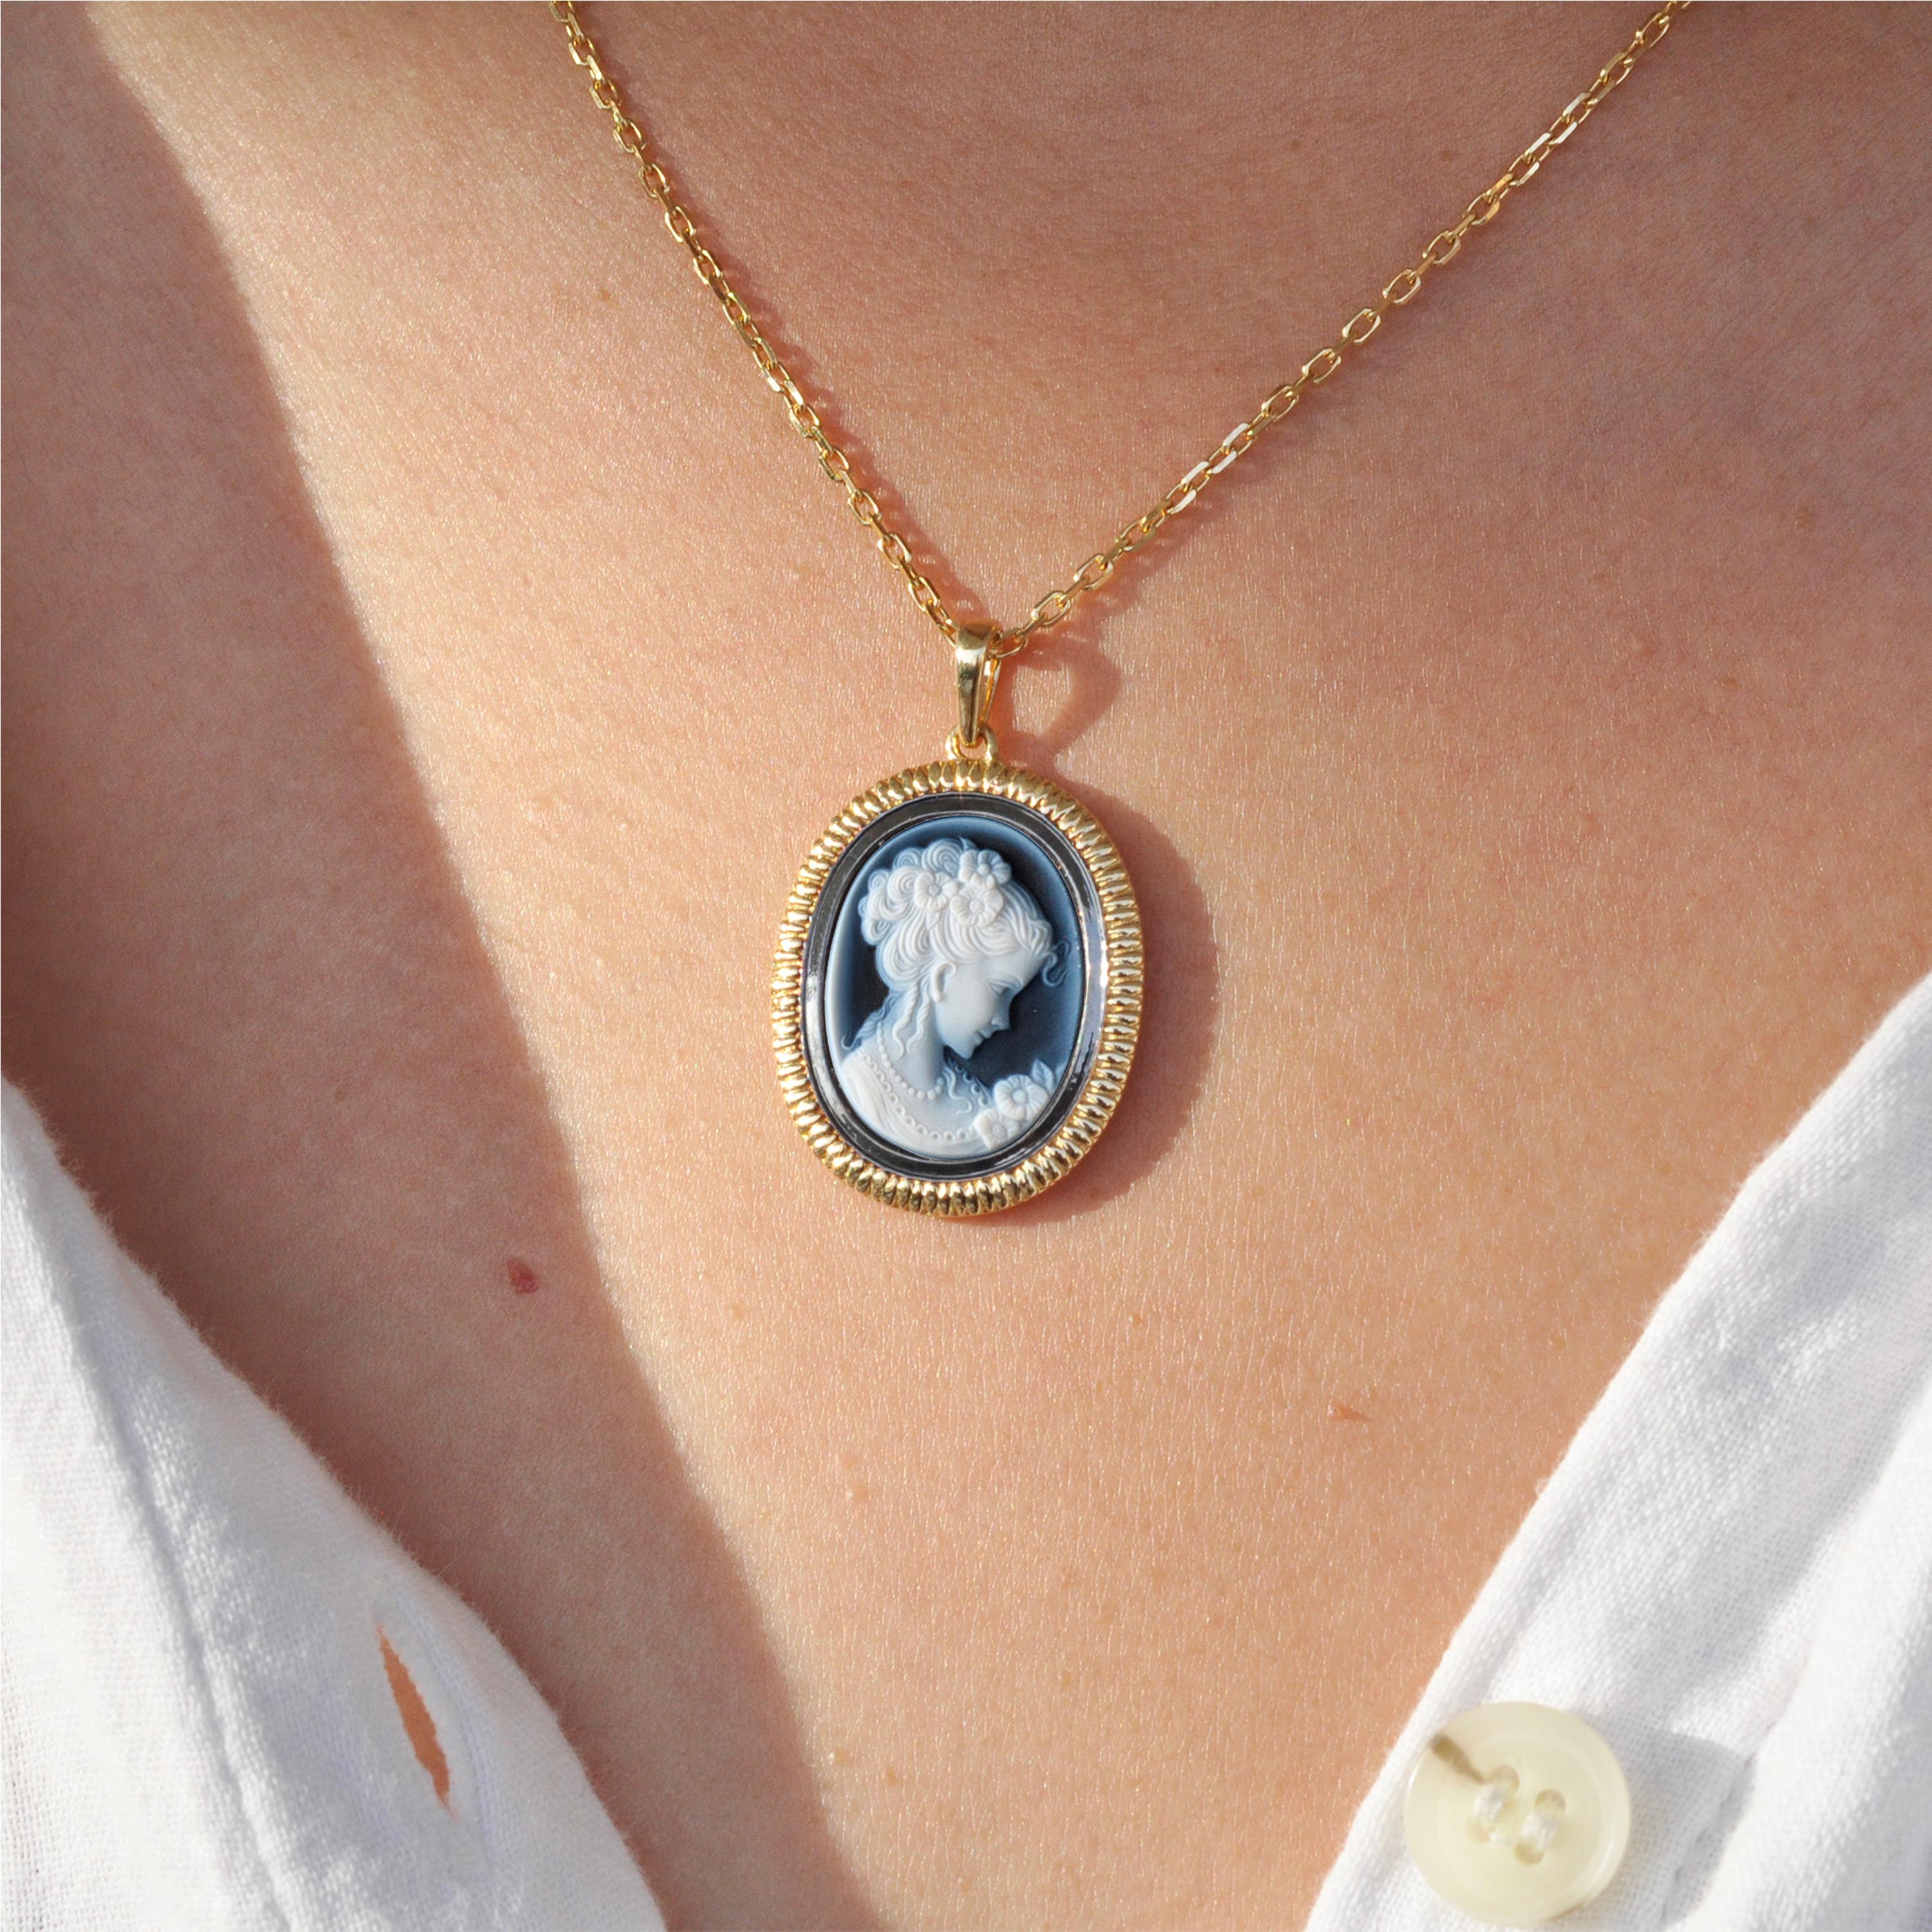 14K Yellow Gold Princess Lady Victorian Agate Cameo Carving Pendant Necklace In New Condition For Sale In Jaipur, Rajasthan